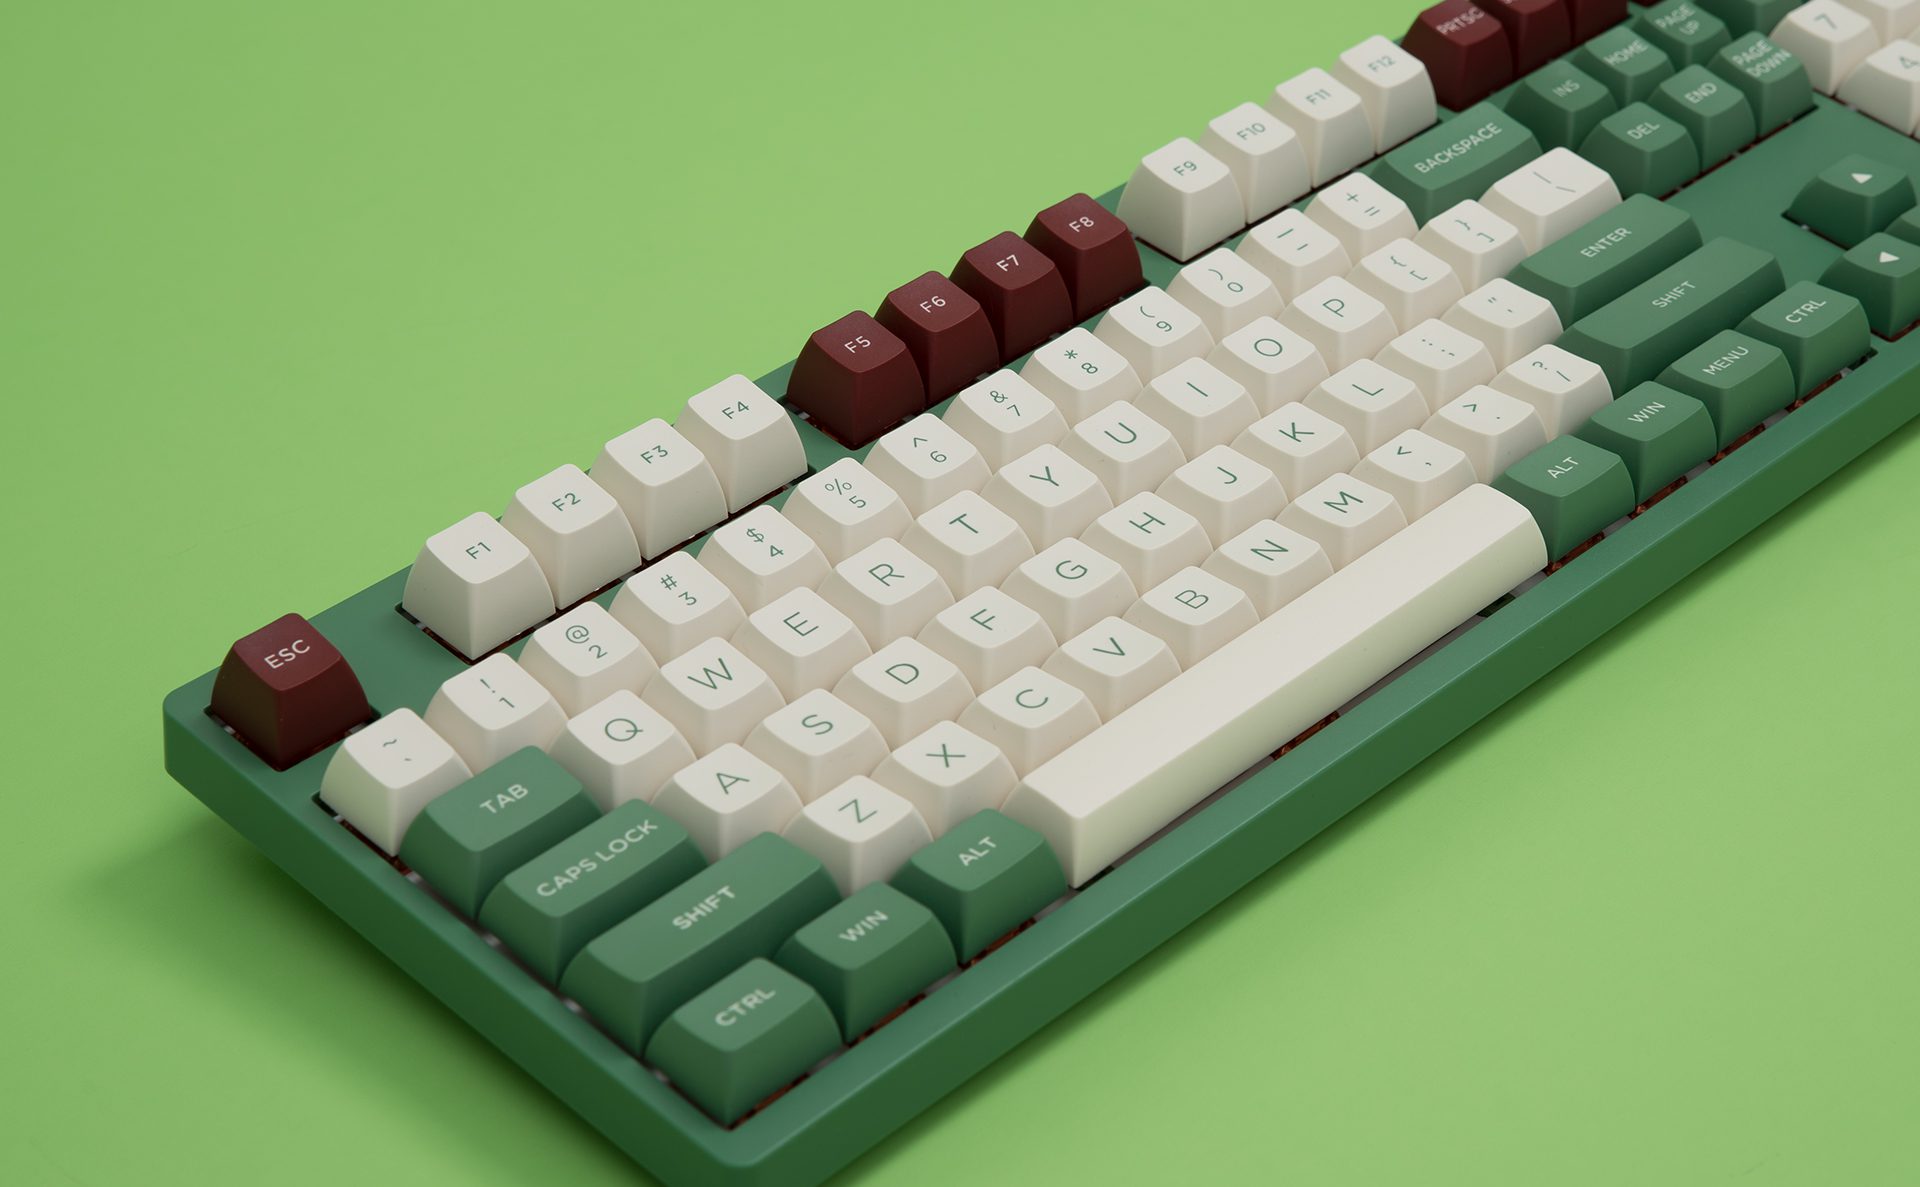 Akko 3108 V2 Matcha Red Bean Full-Size Mechanical Gaming Keyboard Wired 108-key with OSA Profile PBT Double-Shot Keycaps